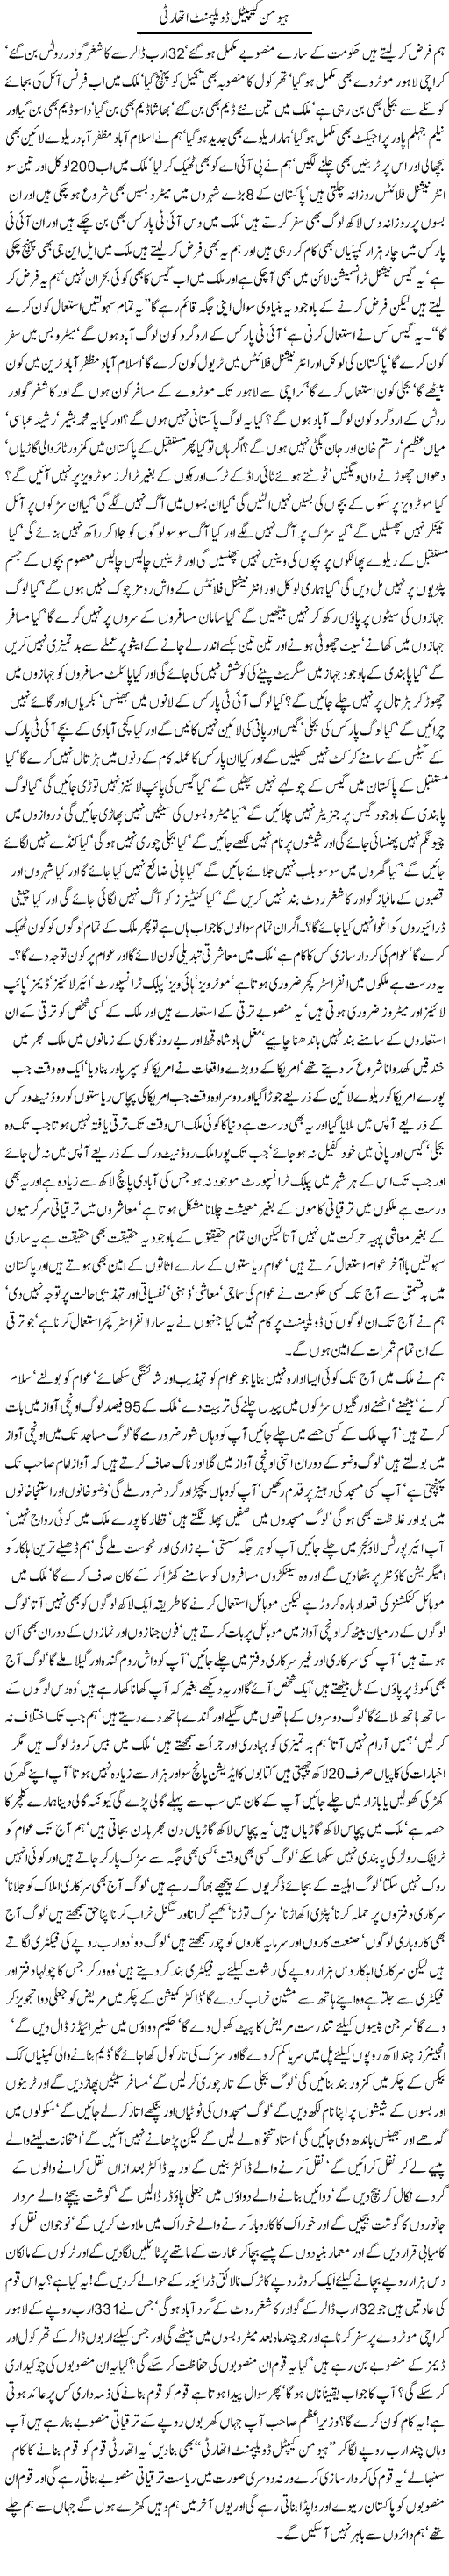 Human Capital Development Athority by Javed Chaudhry